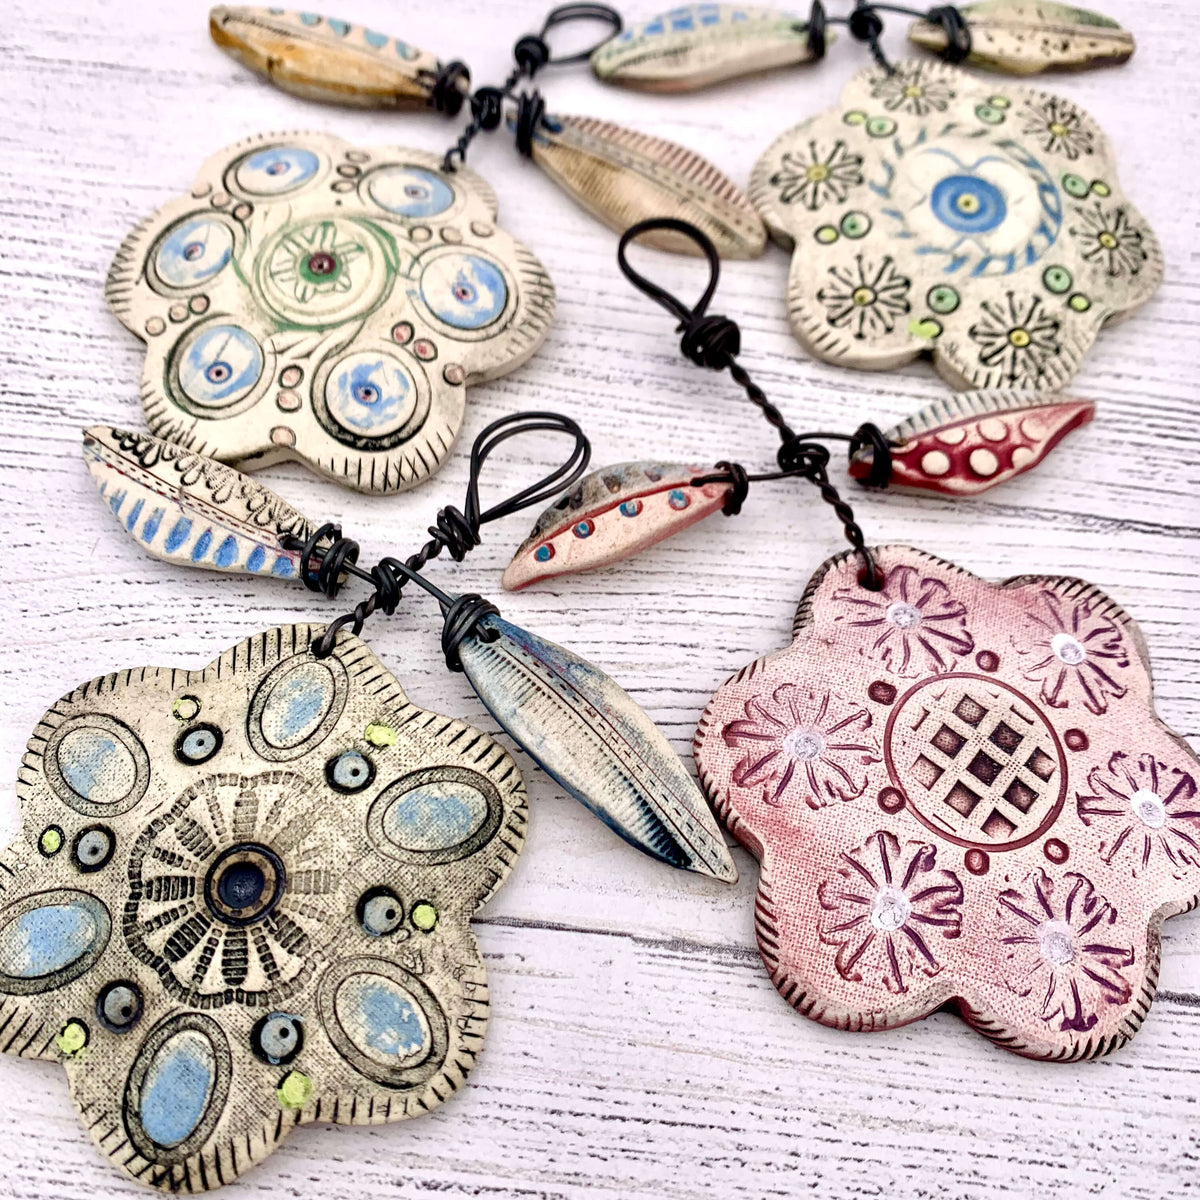 Shirley Vauvelle handmade ceramic flower hanging decorations, made with wire and ceramic.